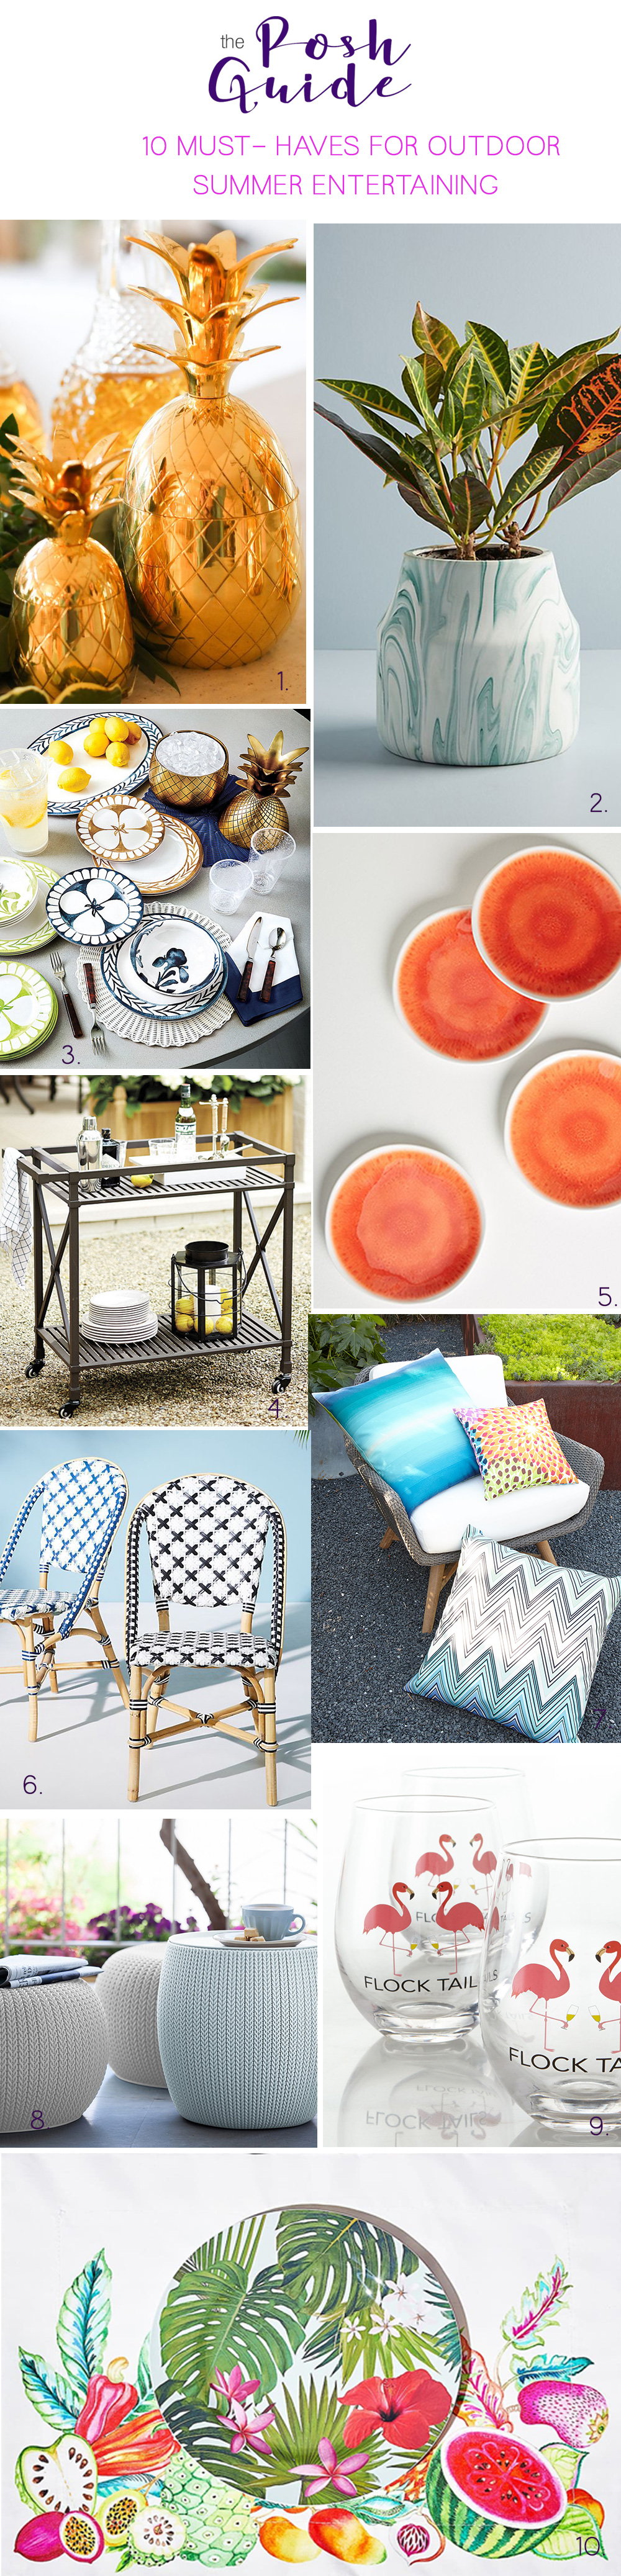 10 Must-Haves for Summer Outdoor Entertaining 